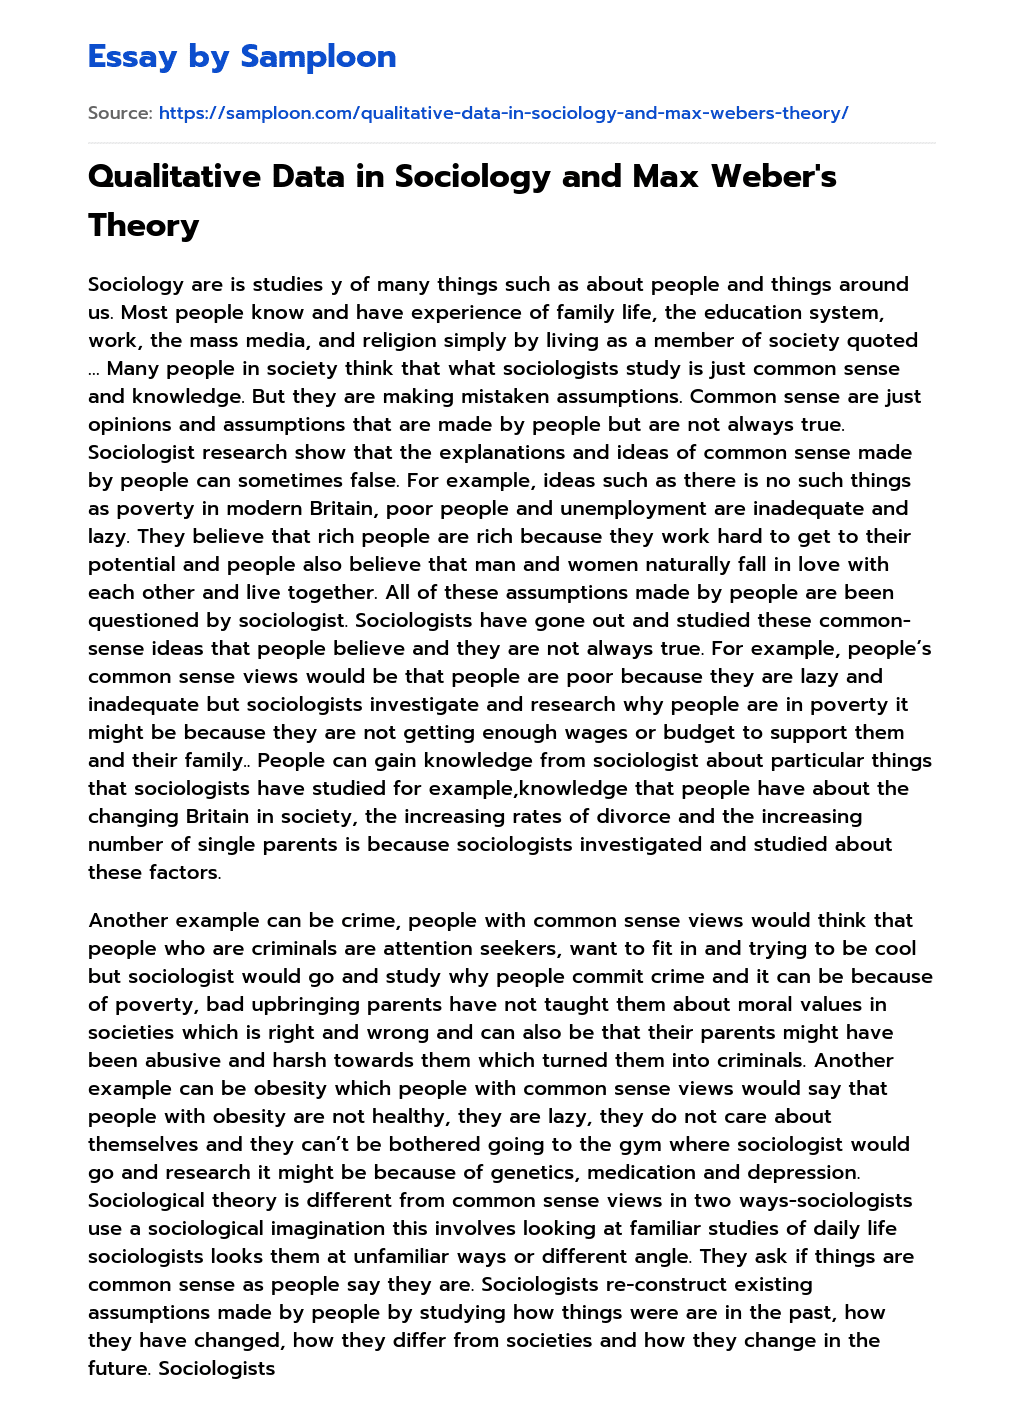 Qualitative Data in Sociology and Max Weber’s Theory Argumentative Essay essay